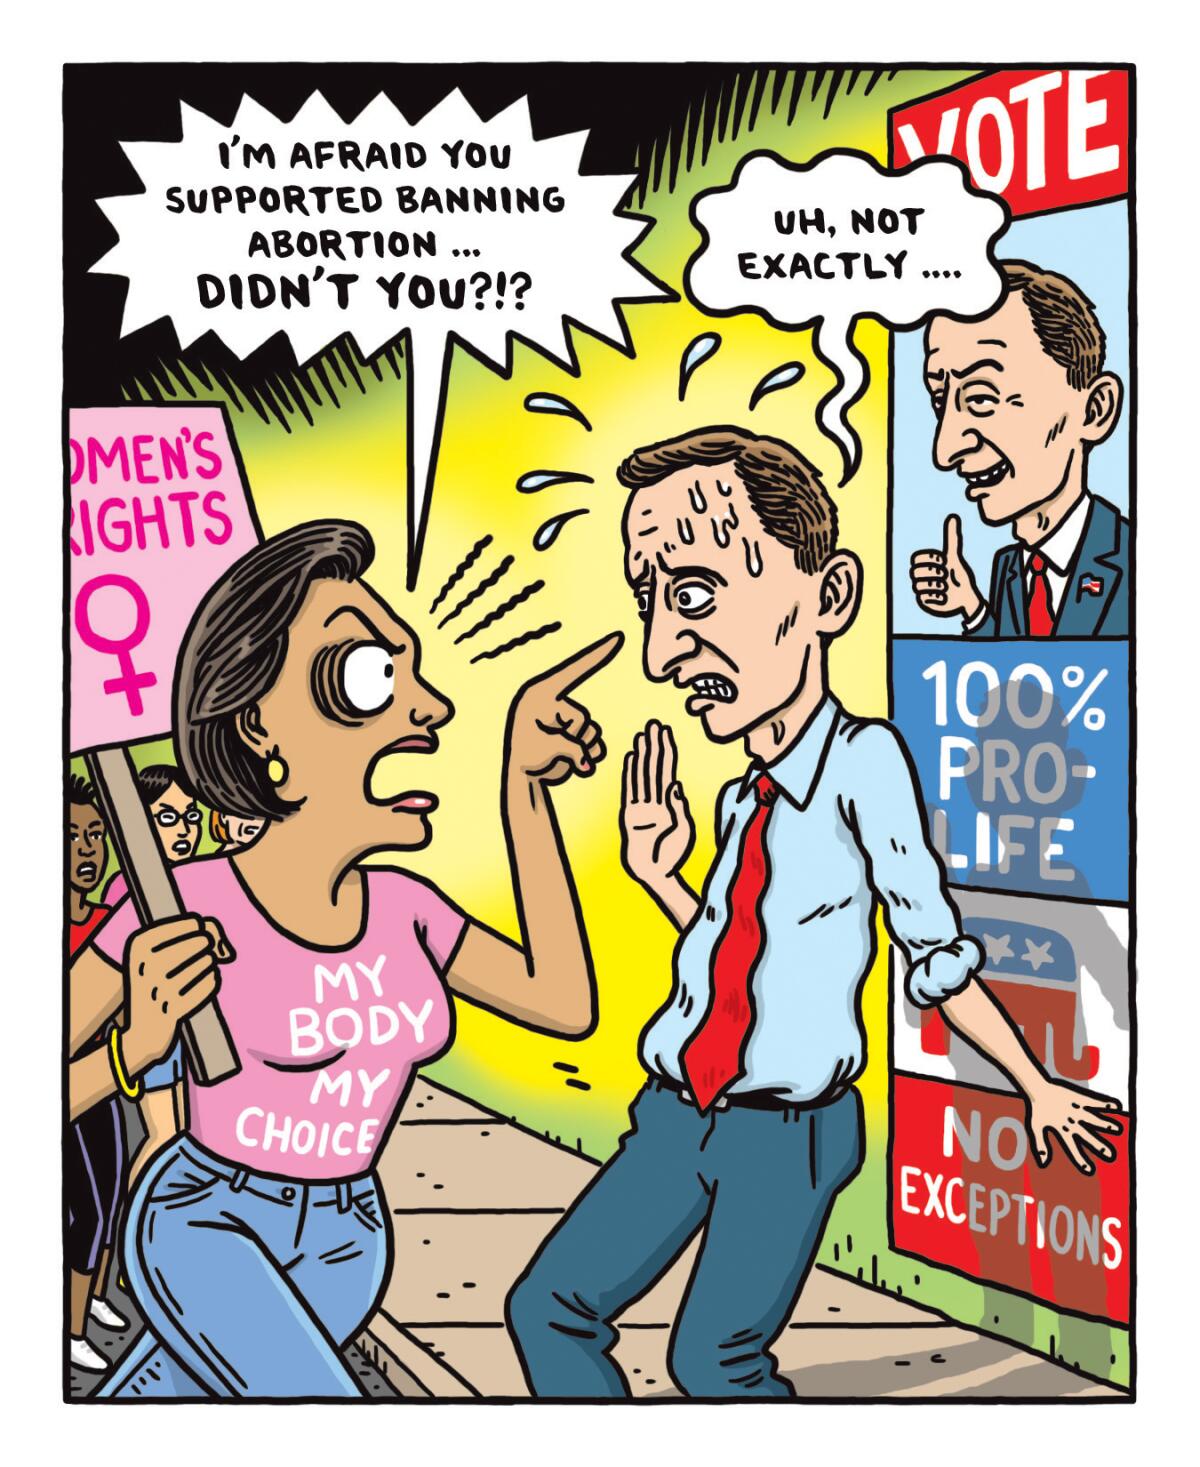 Illustration of a woman in a "My body my choice" T-shirt confronting a political candidate wearing a red tie and sweating